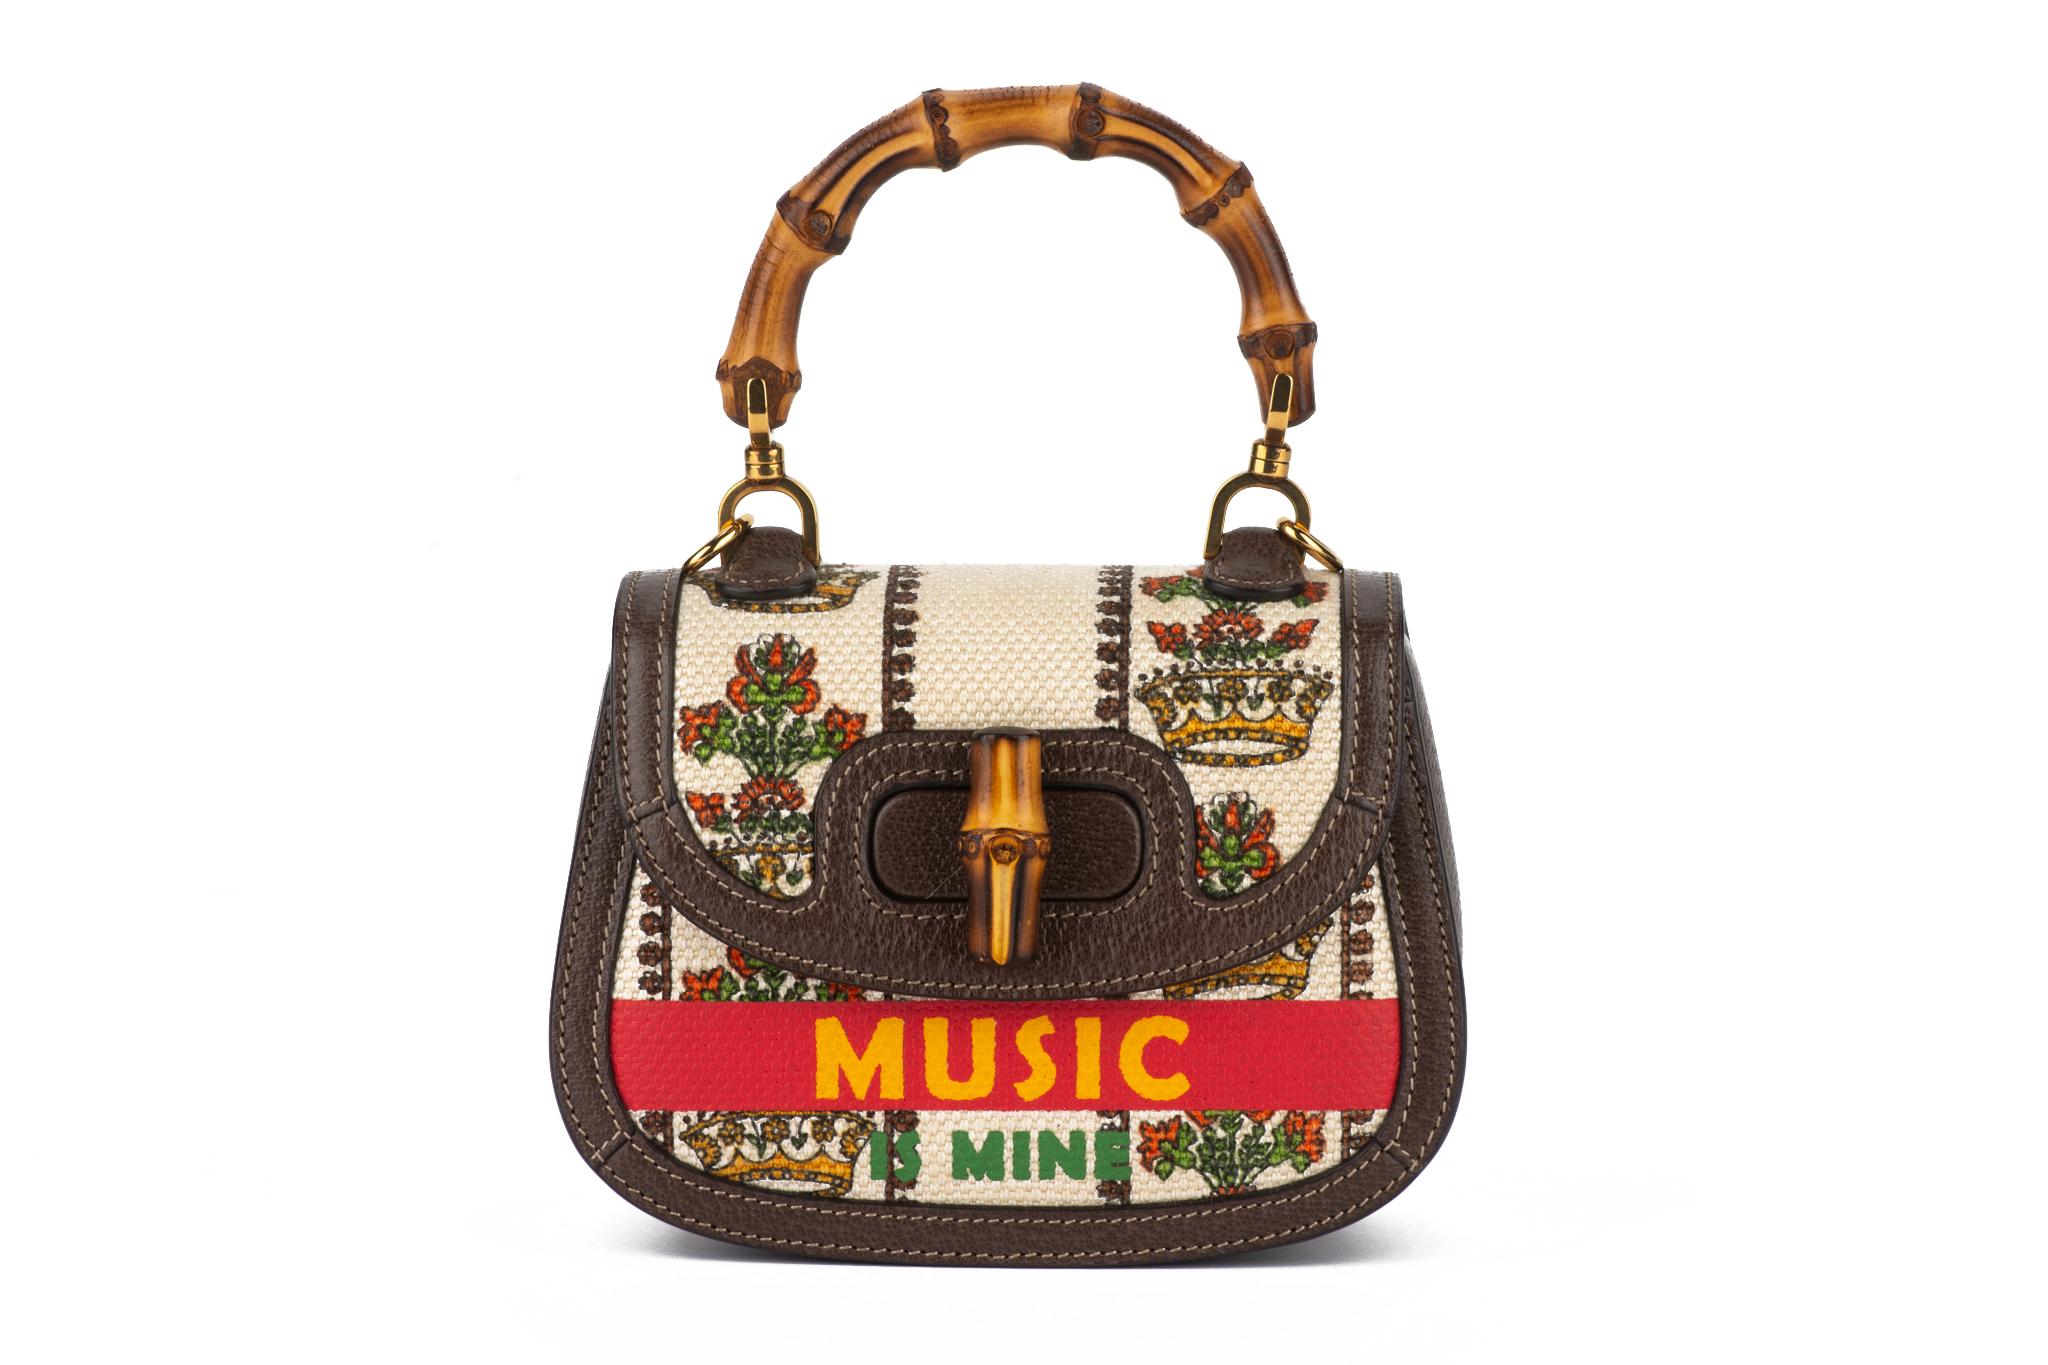 Gucci new limited edition 100 anniversary music mini bamboo 1947 bag. Printed canvas and chocolate leather details, iconic bamboo details .
Handle drop 3”. Detachable and adjustable shoulder strap drop 21”.
Detachable shoulder strap in canvas drop